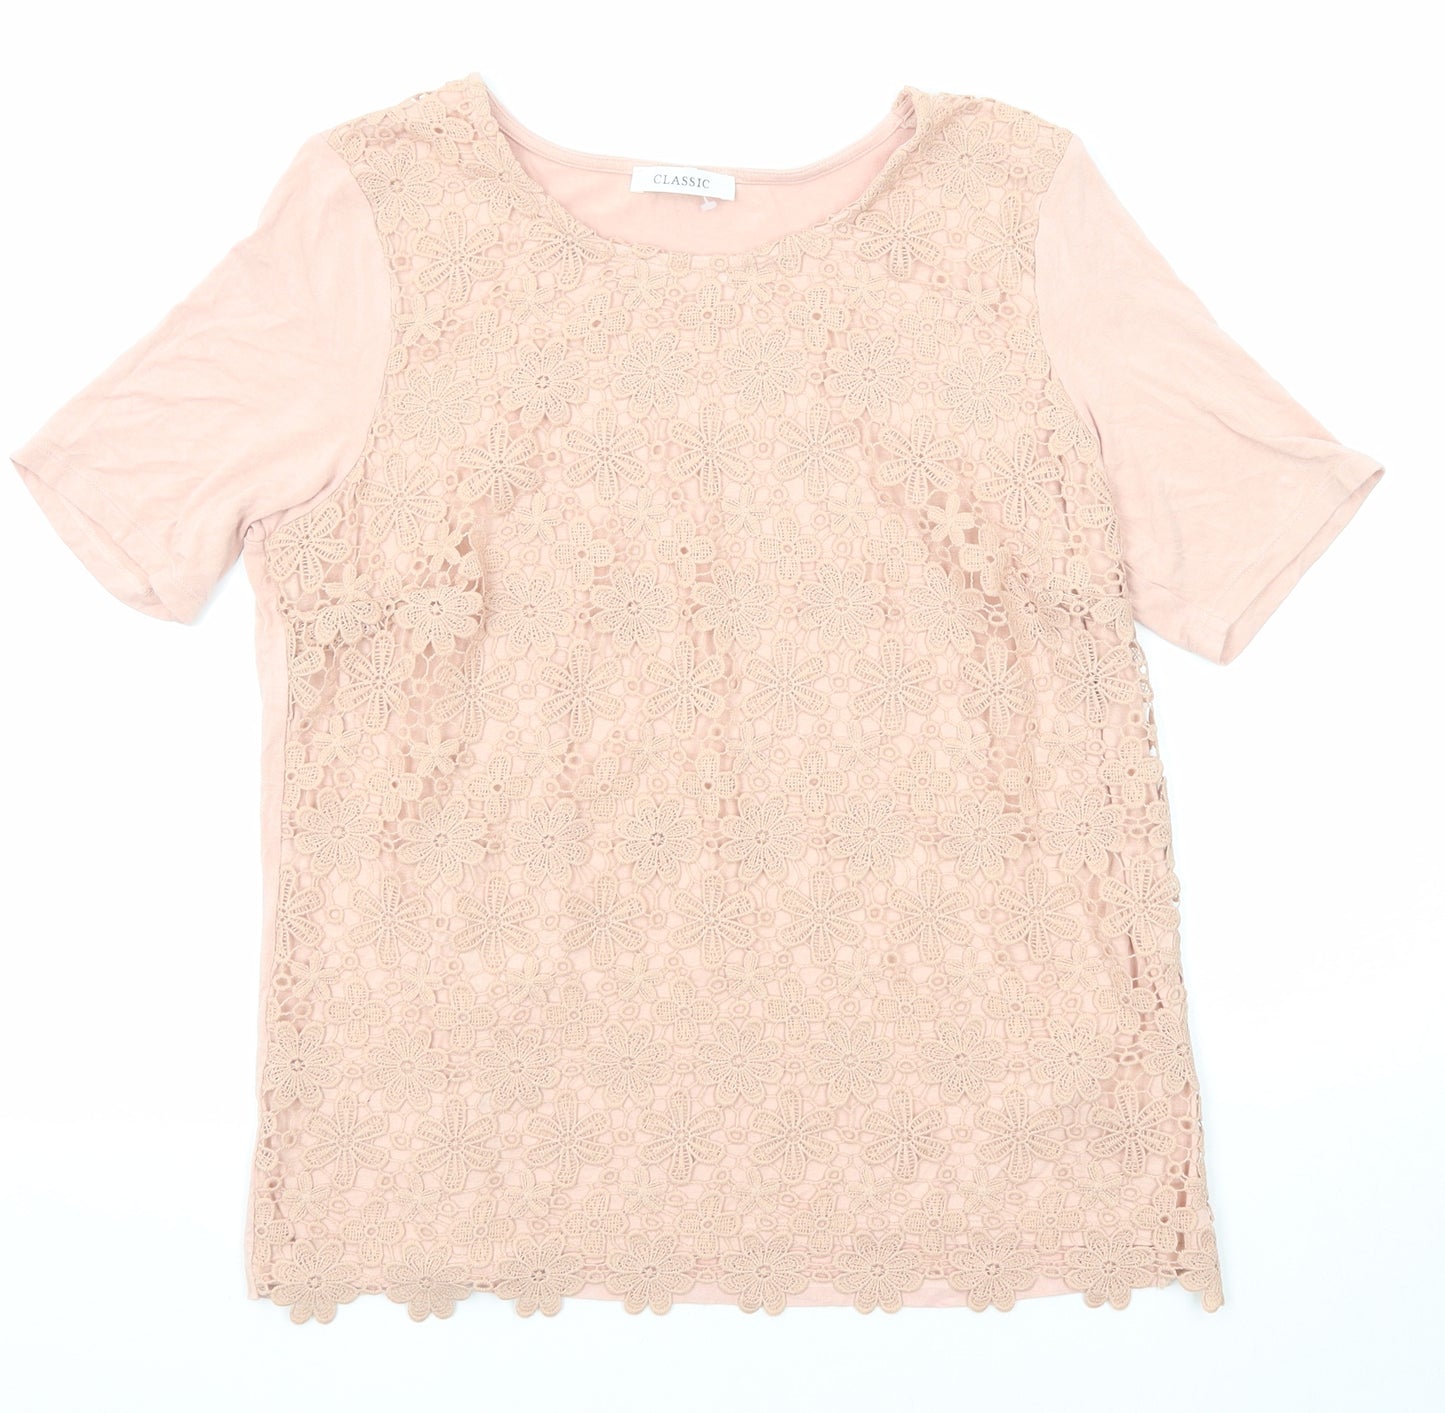 Marks and Spencer Womens Pink Polyester Basic Blouse Size 12 Boat Neck - Crocheted Lace Front